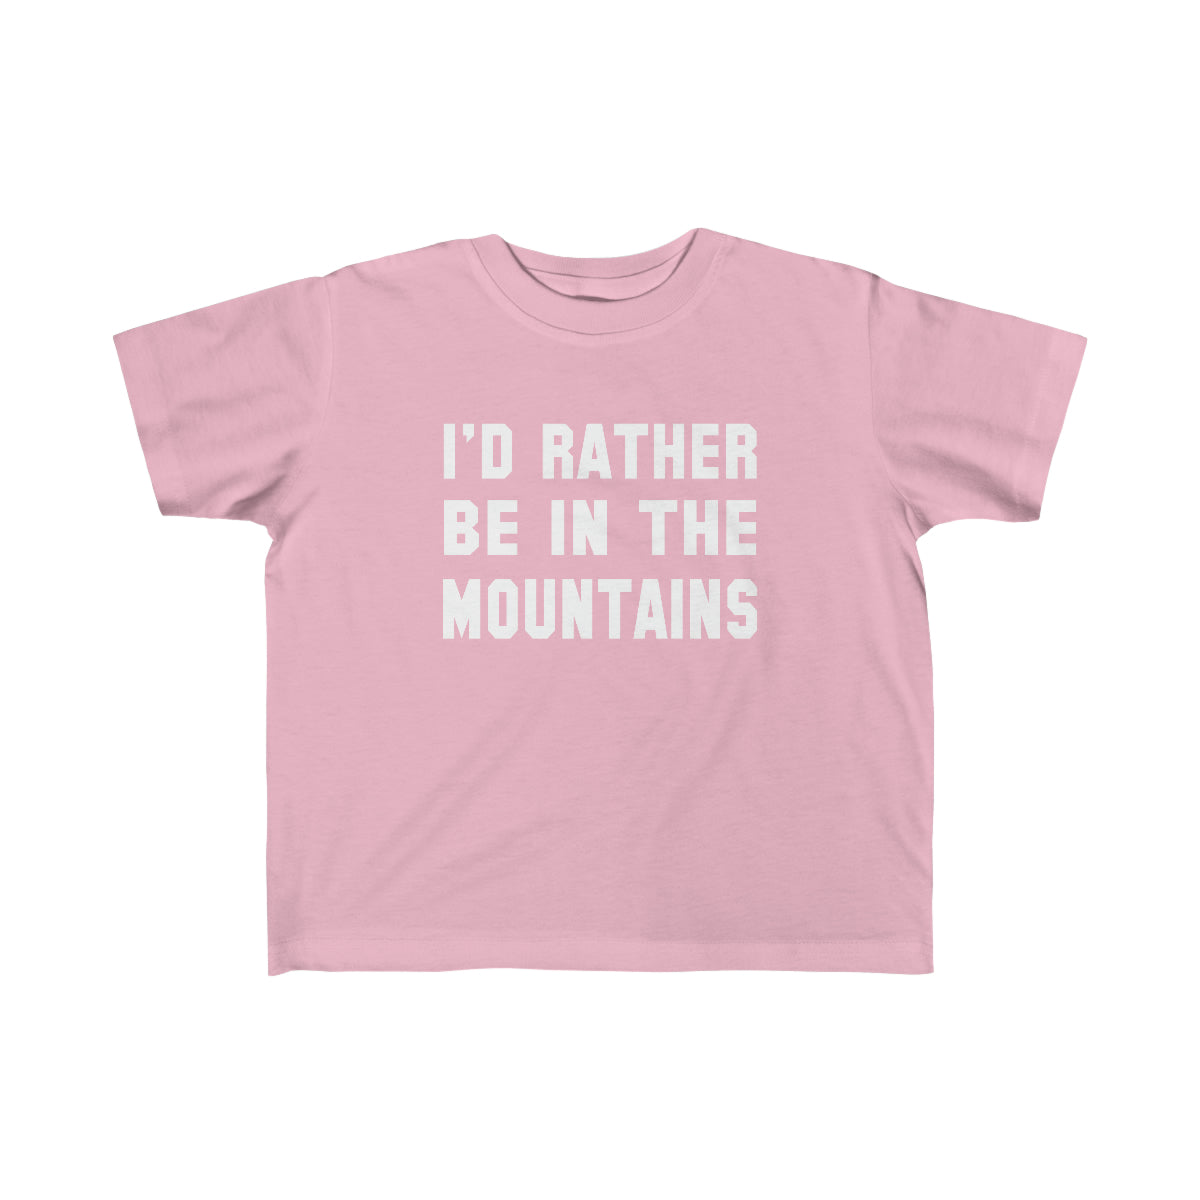 I'd Rather Be In The Mountains Toddler Tee Pink / 2T - The Northwest Store